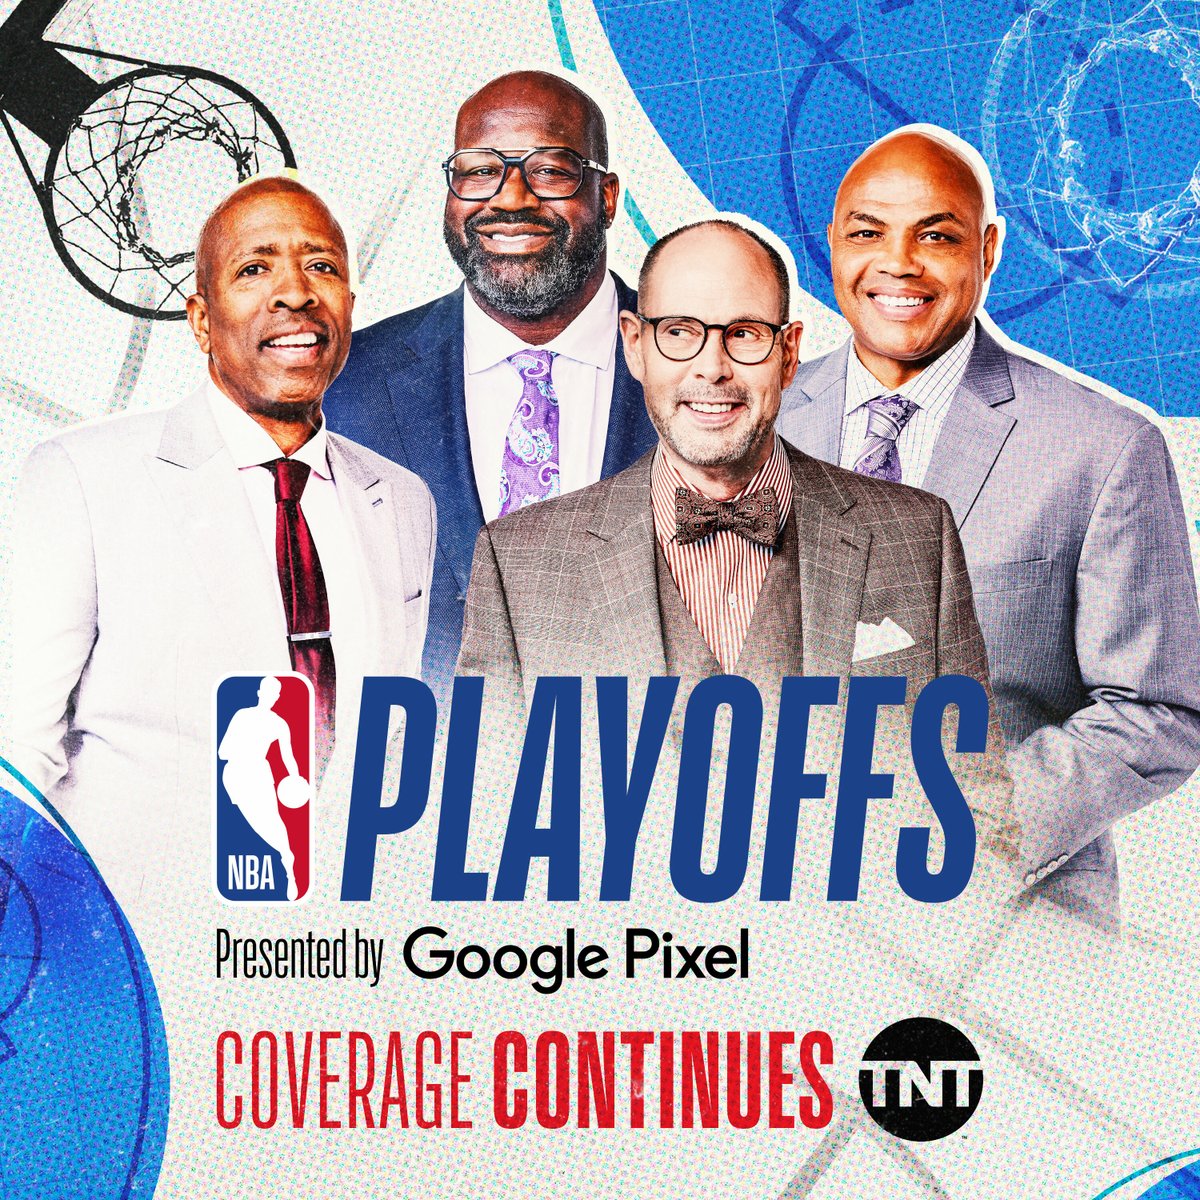 Tune into the 2024 NBA Playoffs presented by Google Pixel on Sunday, April 21 on TNT. There’s an #OptimumTV package for everyone. Learn more at bit.ly/44714b2